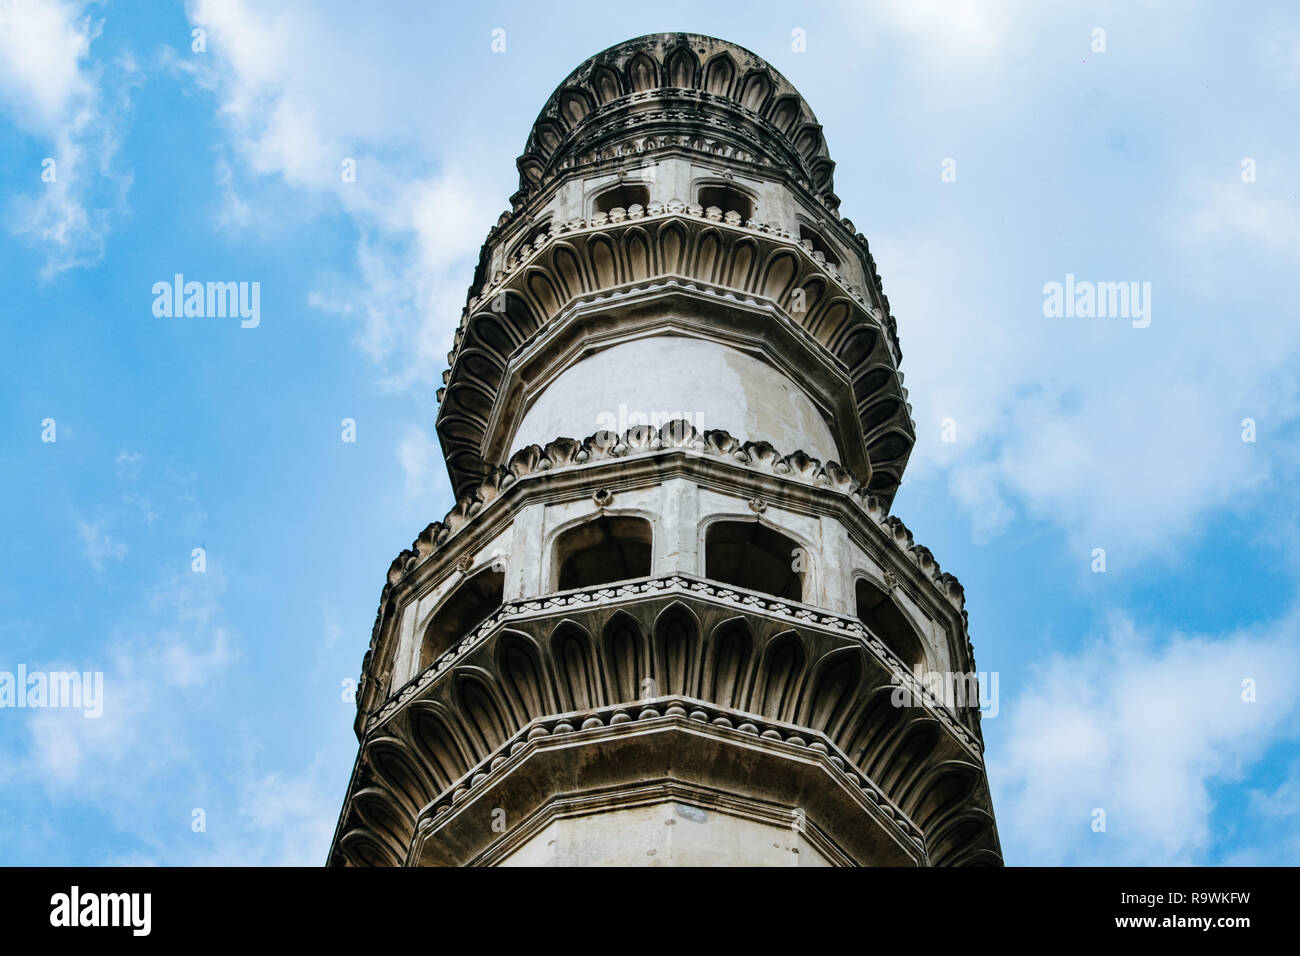 One of the Minarets of Char Minar, Hyderabad Stock Photo